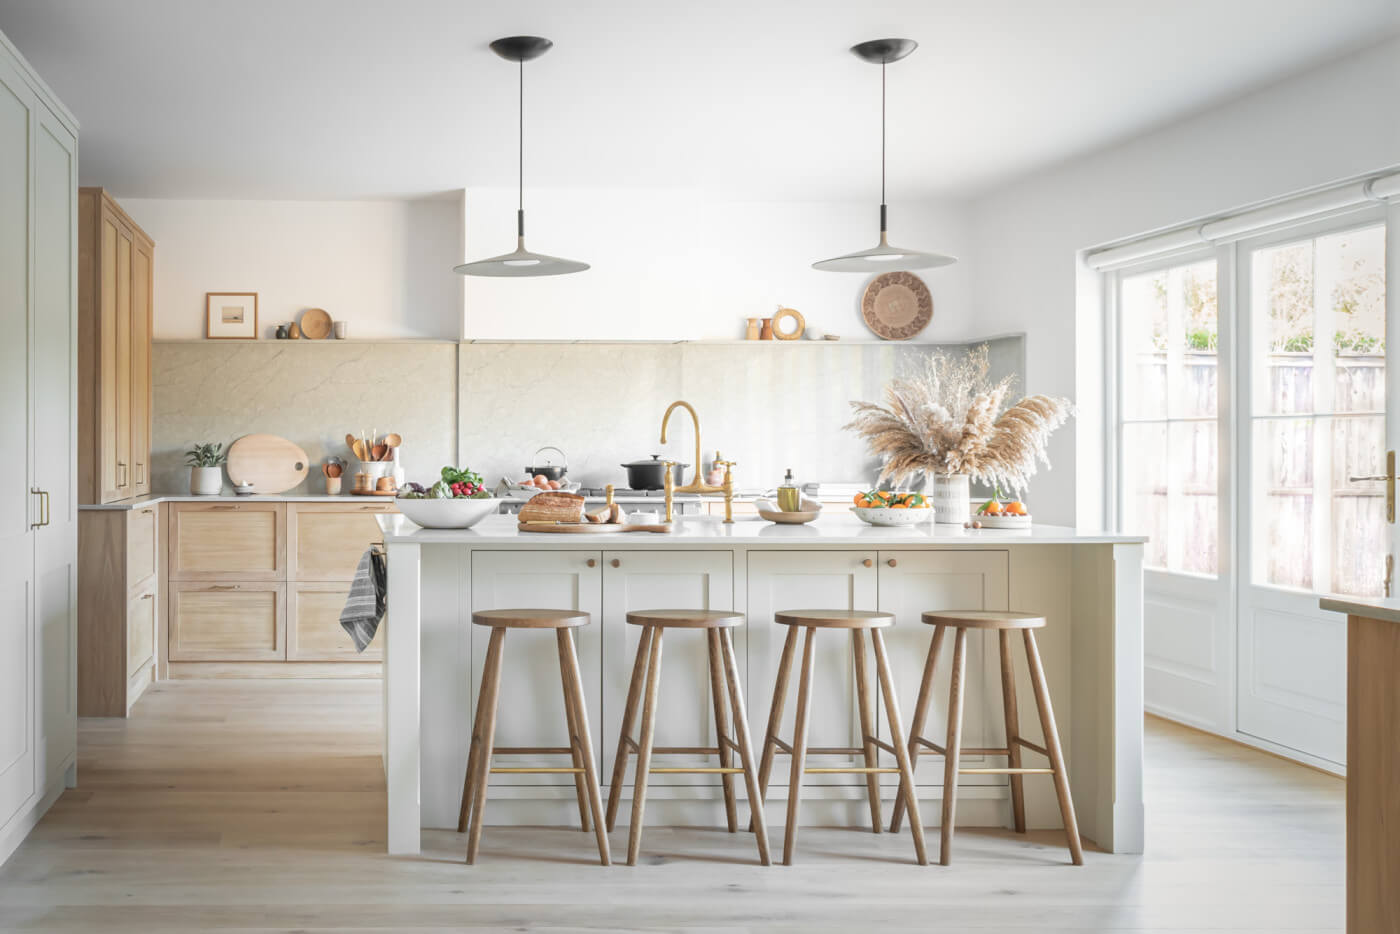 Handmade kitchen cabinetry brings natural beauty into focus